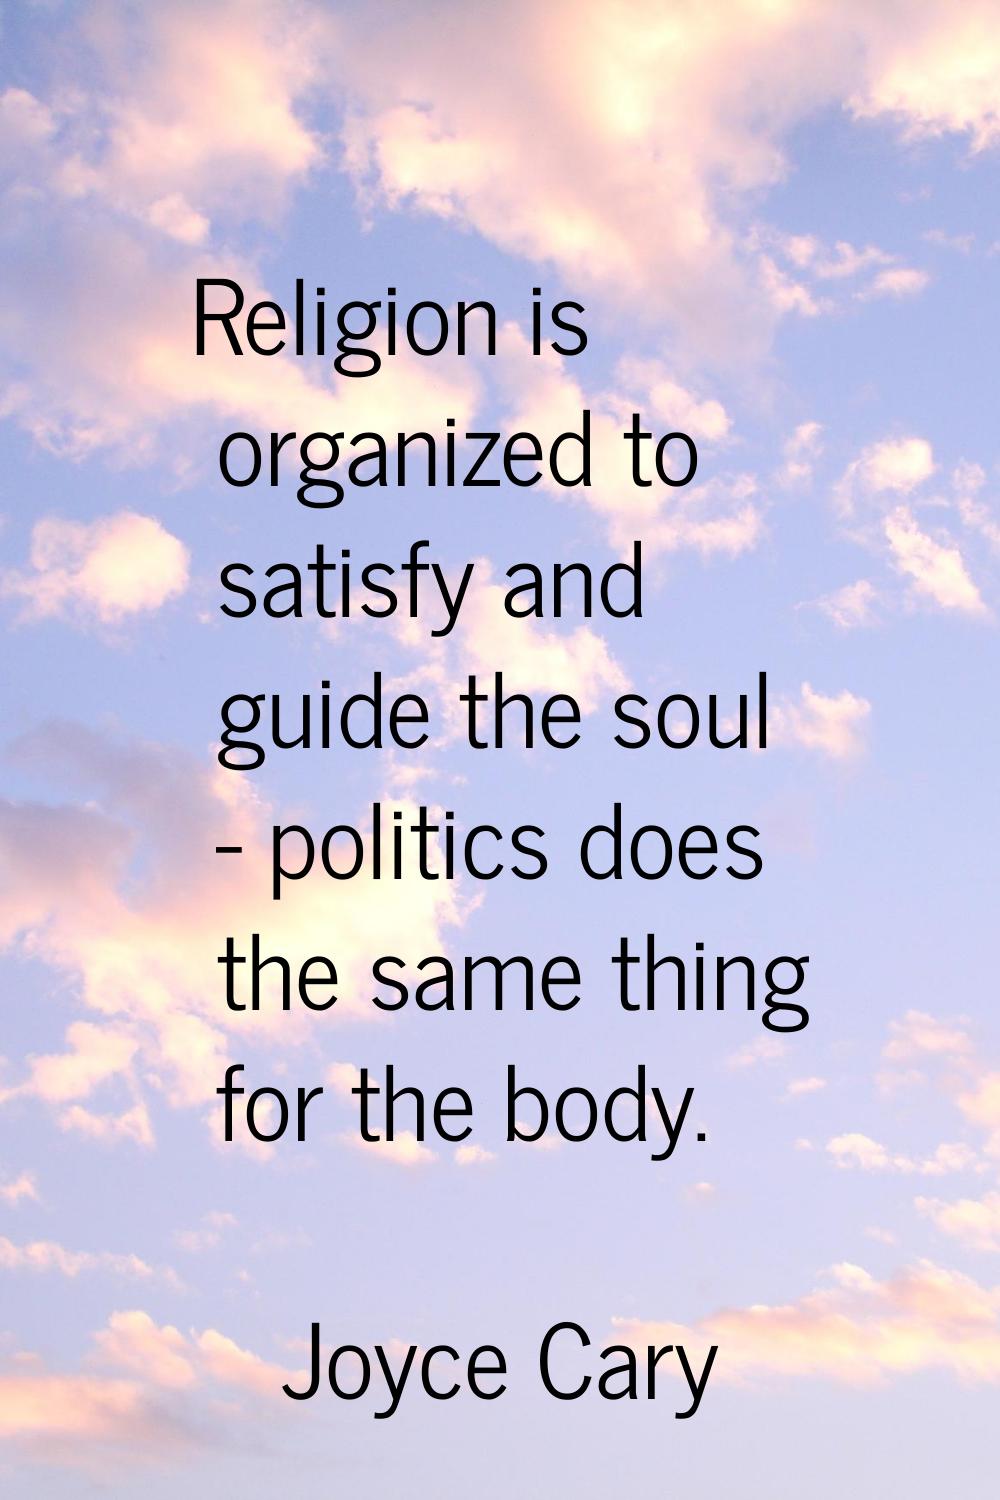 Religion is organized to satisfy and guide the soul - politics does the same thing for the body.